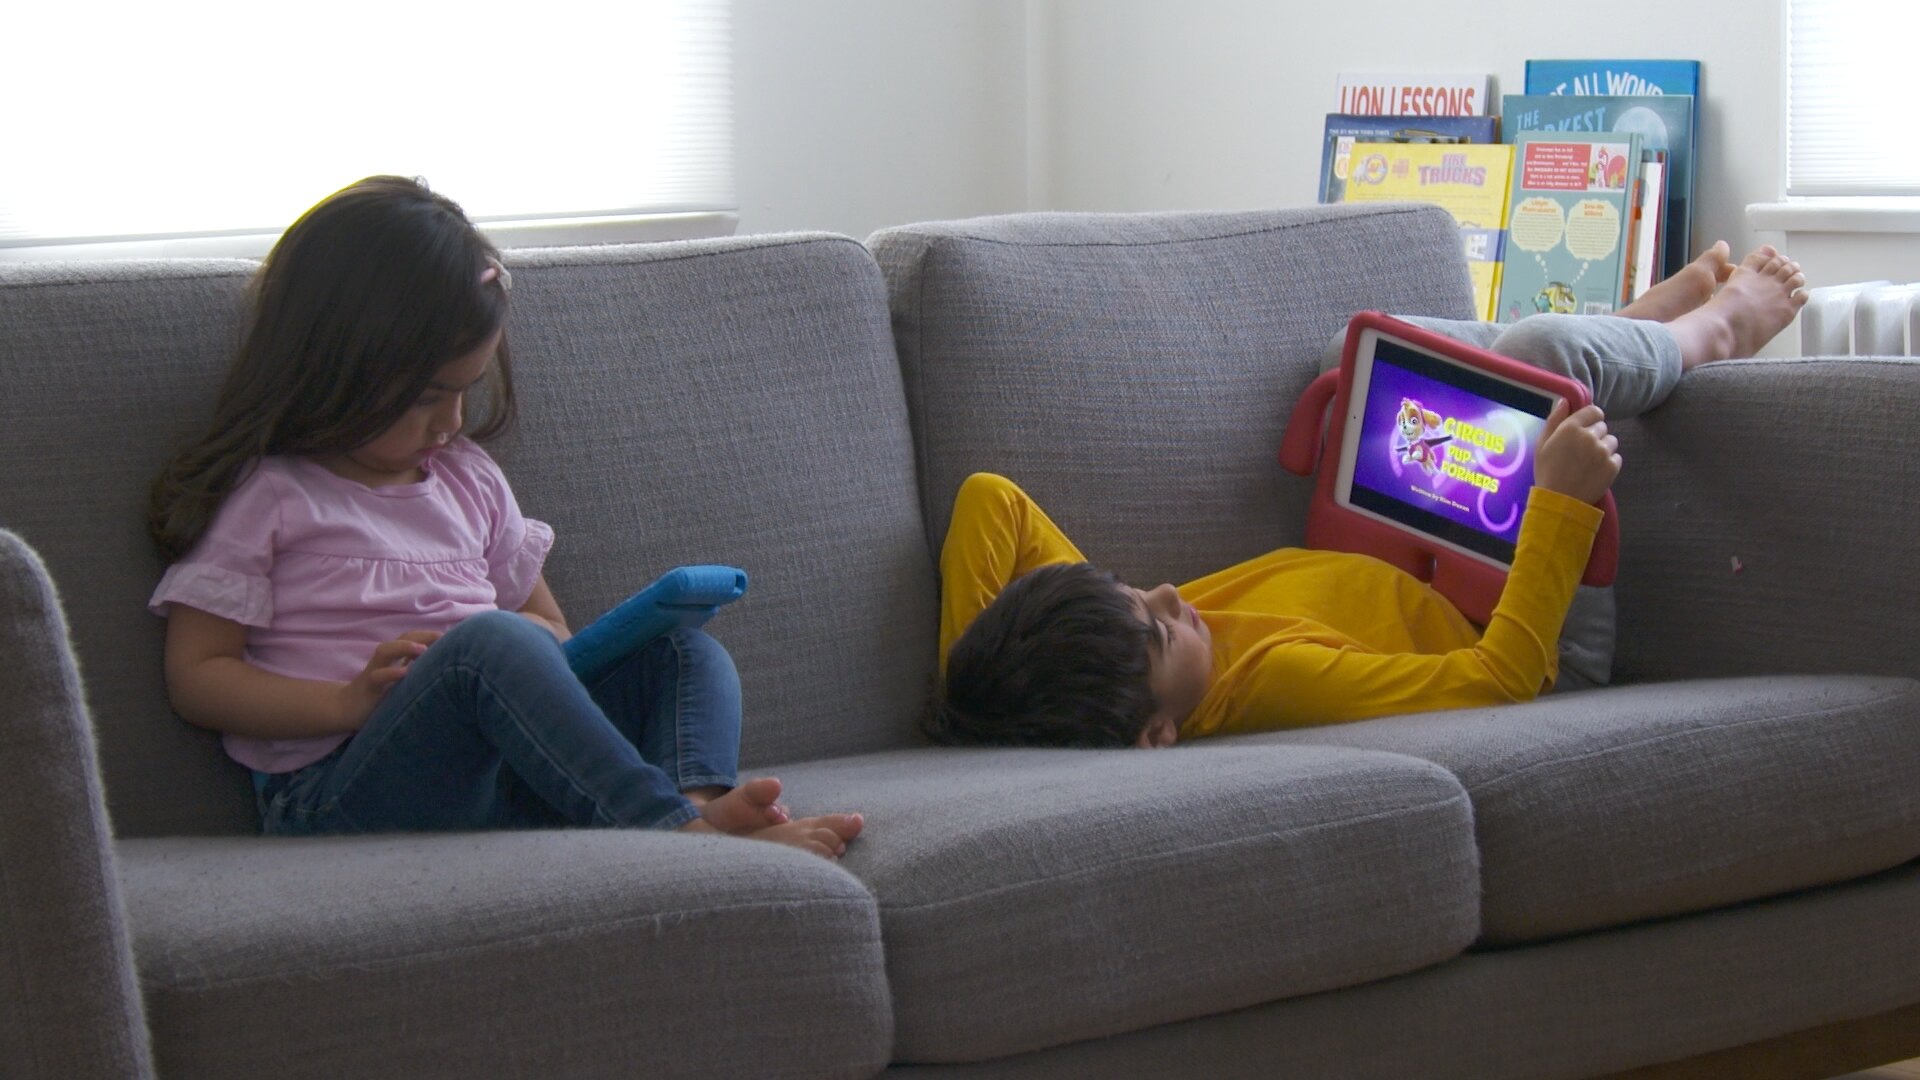 kids side by side on couch with ipads feet hanging over copy.jpg